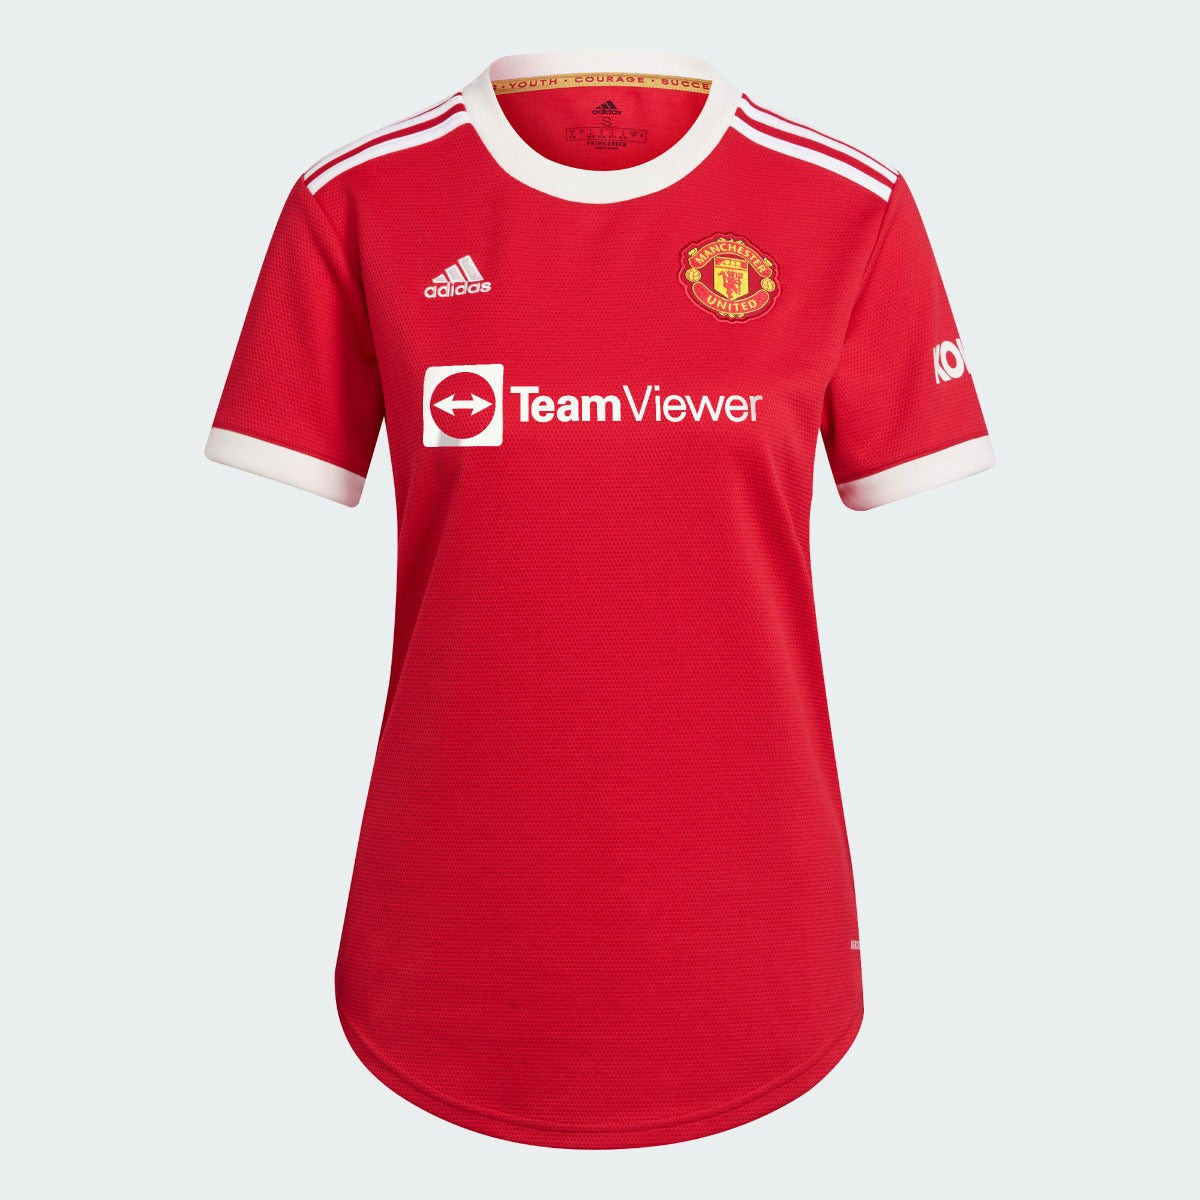 Adidas 2021-22 Manchester United Women Home Jersey - Red